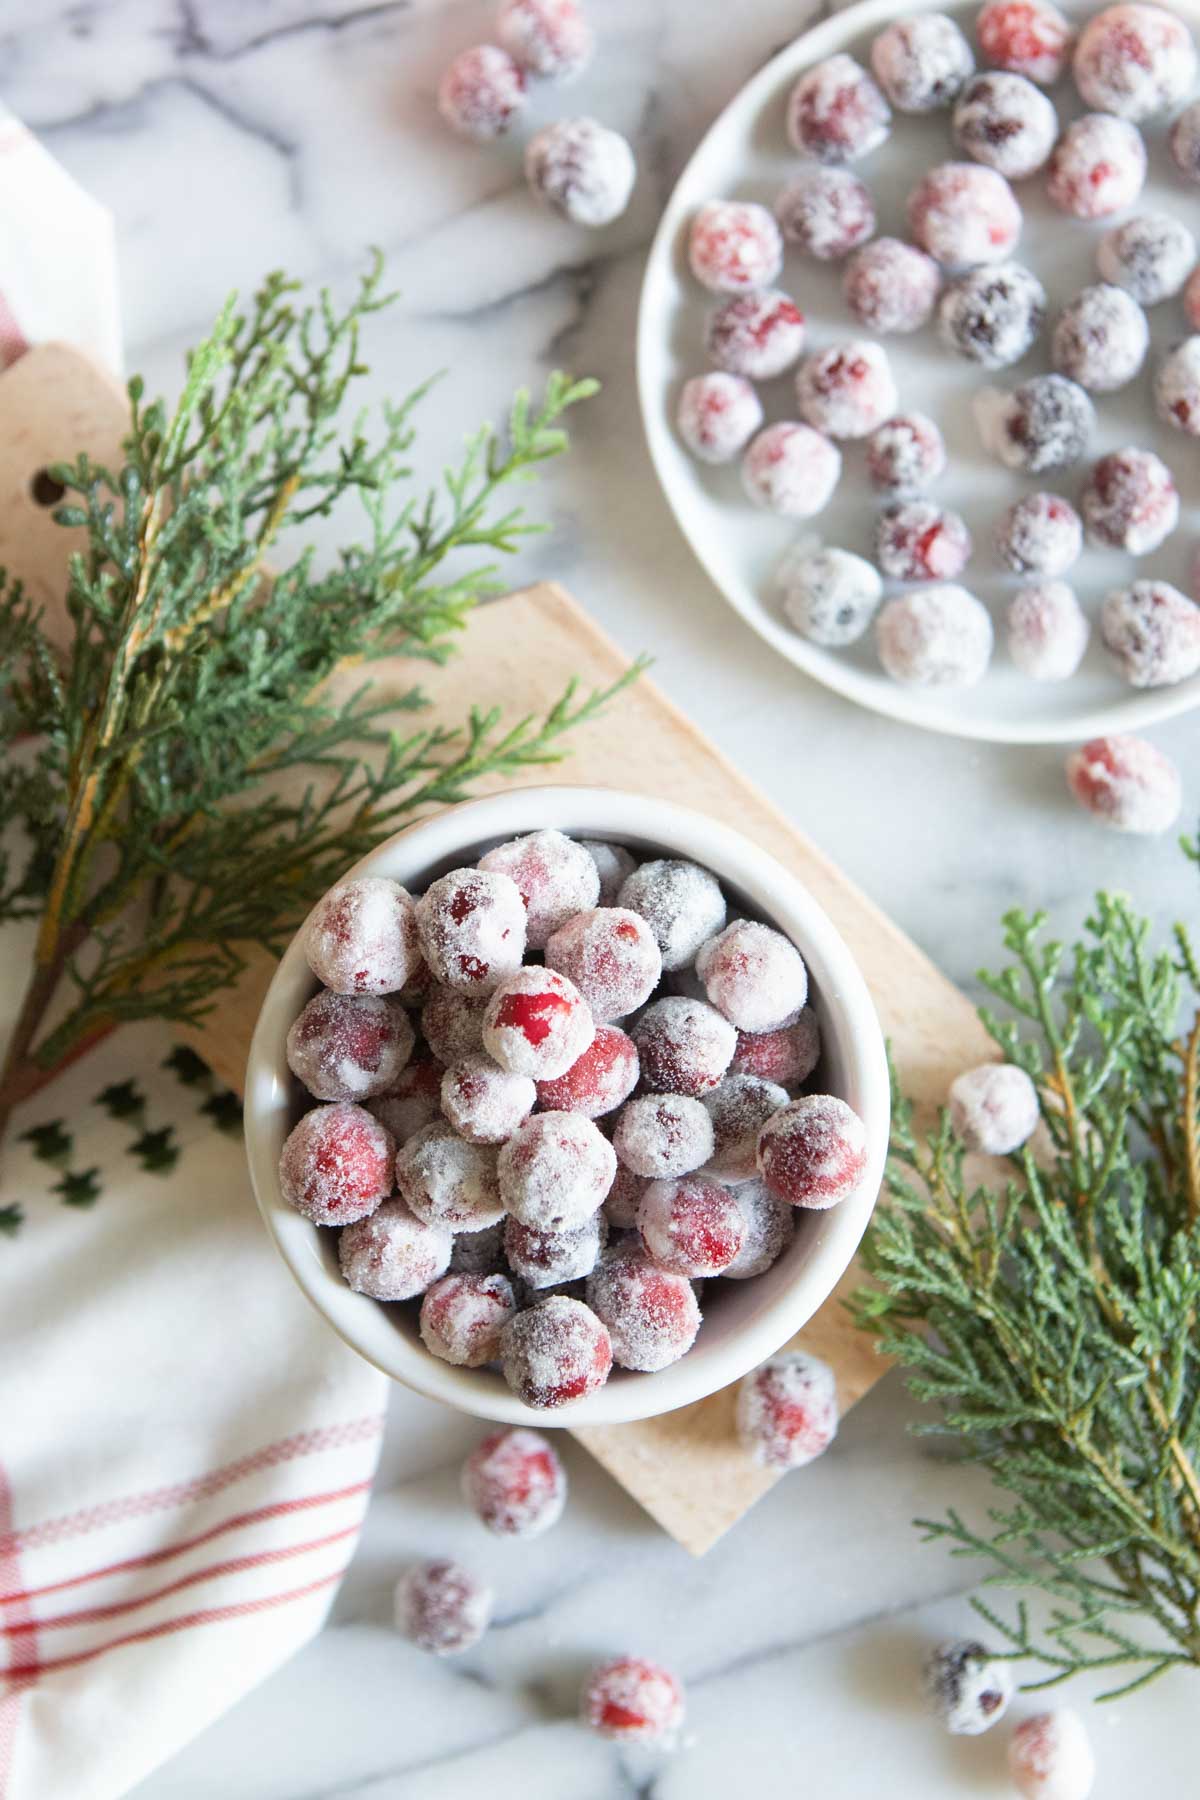 sweet candy cranberries for Christmas, in a white bowl